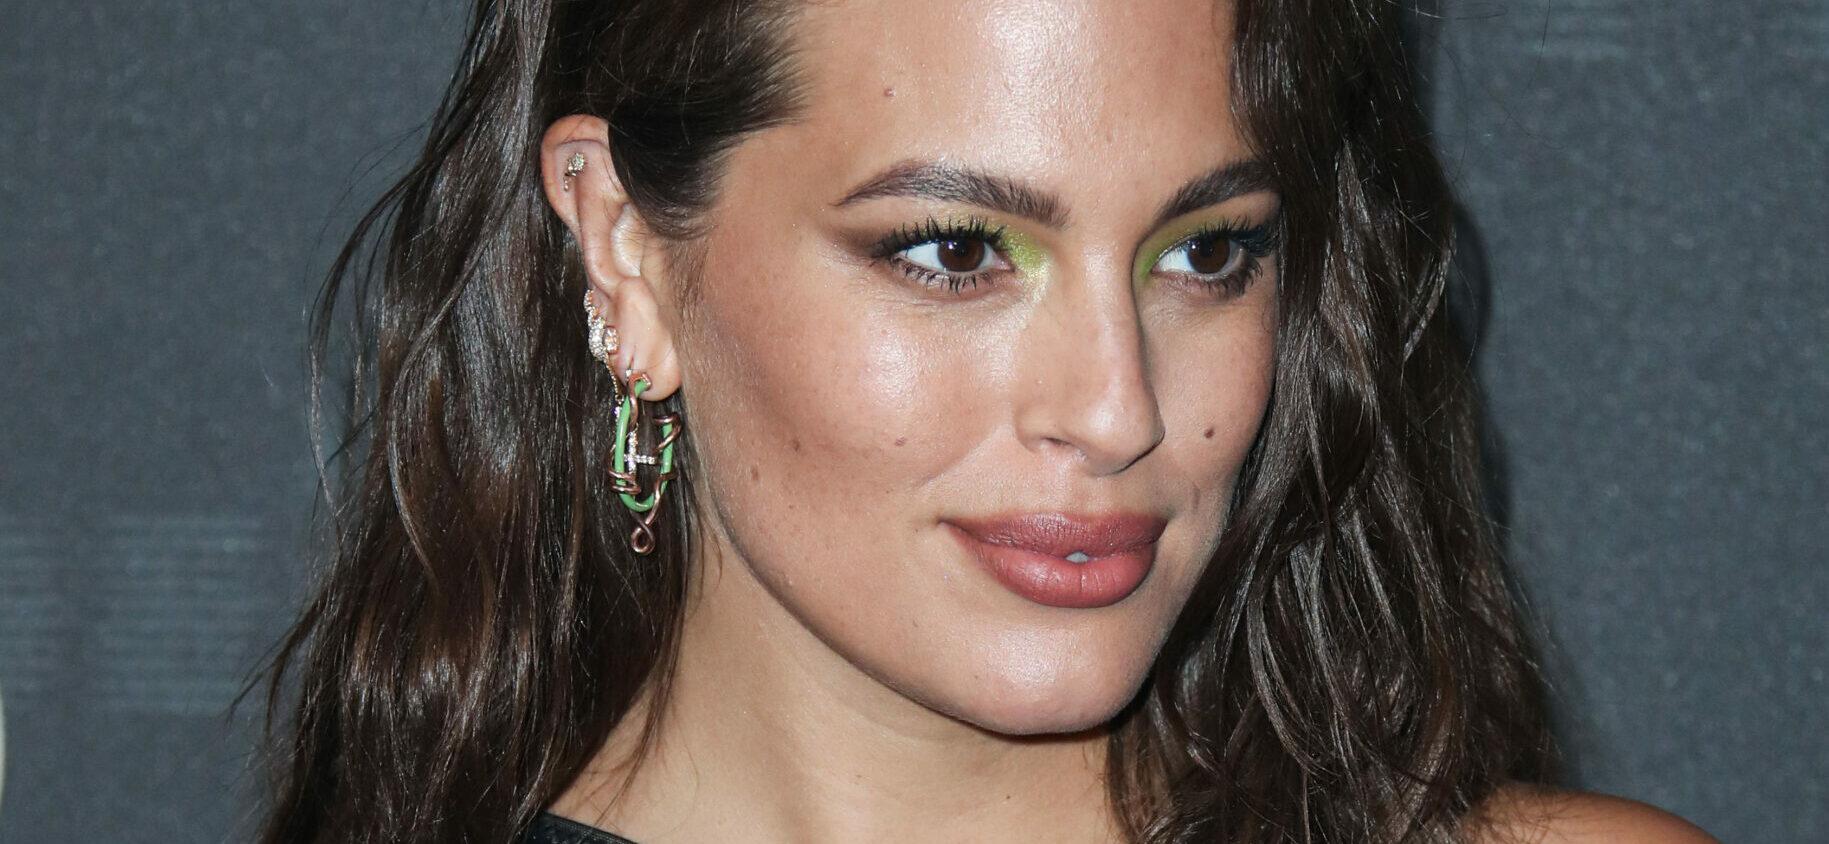 Ashley Graham at the Savage X Fenty Show Presented By Amazon Prime Video